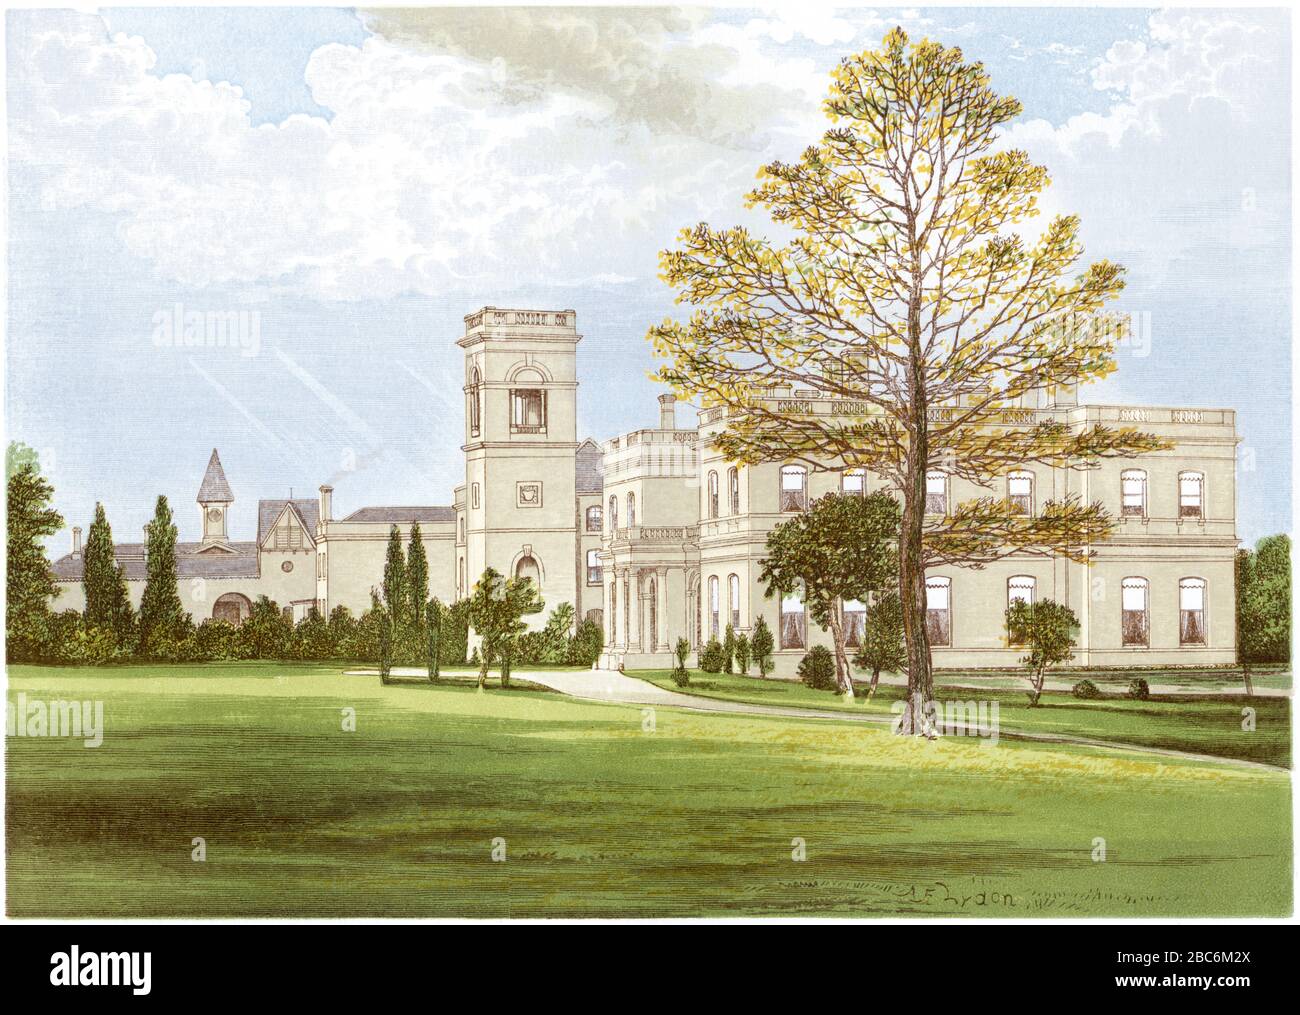 Coloured illustration of Stowlangtoft Hall near Bury St Edmunds, Suffolk scanned at high res from a book printed in 1870. Believed copyright free. Stock Photo